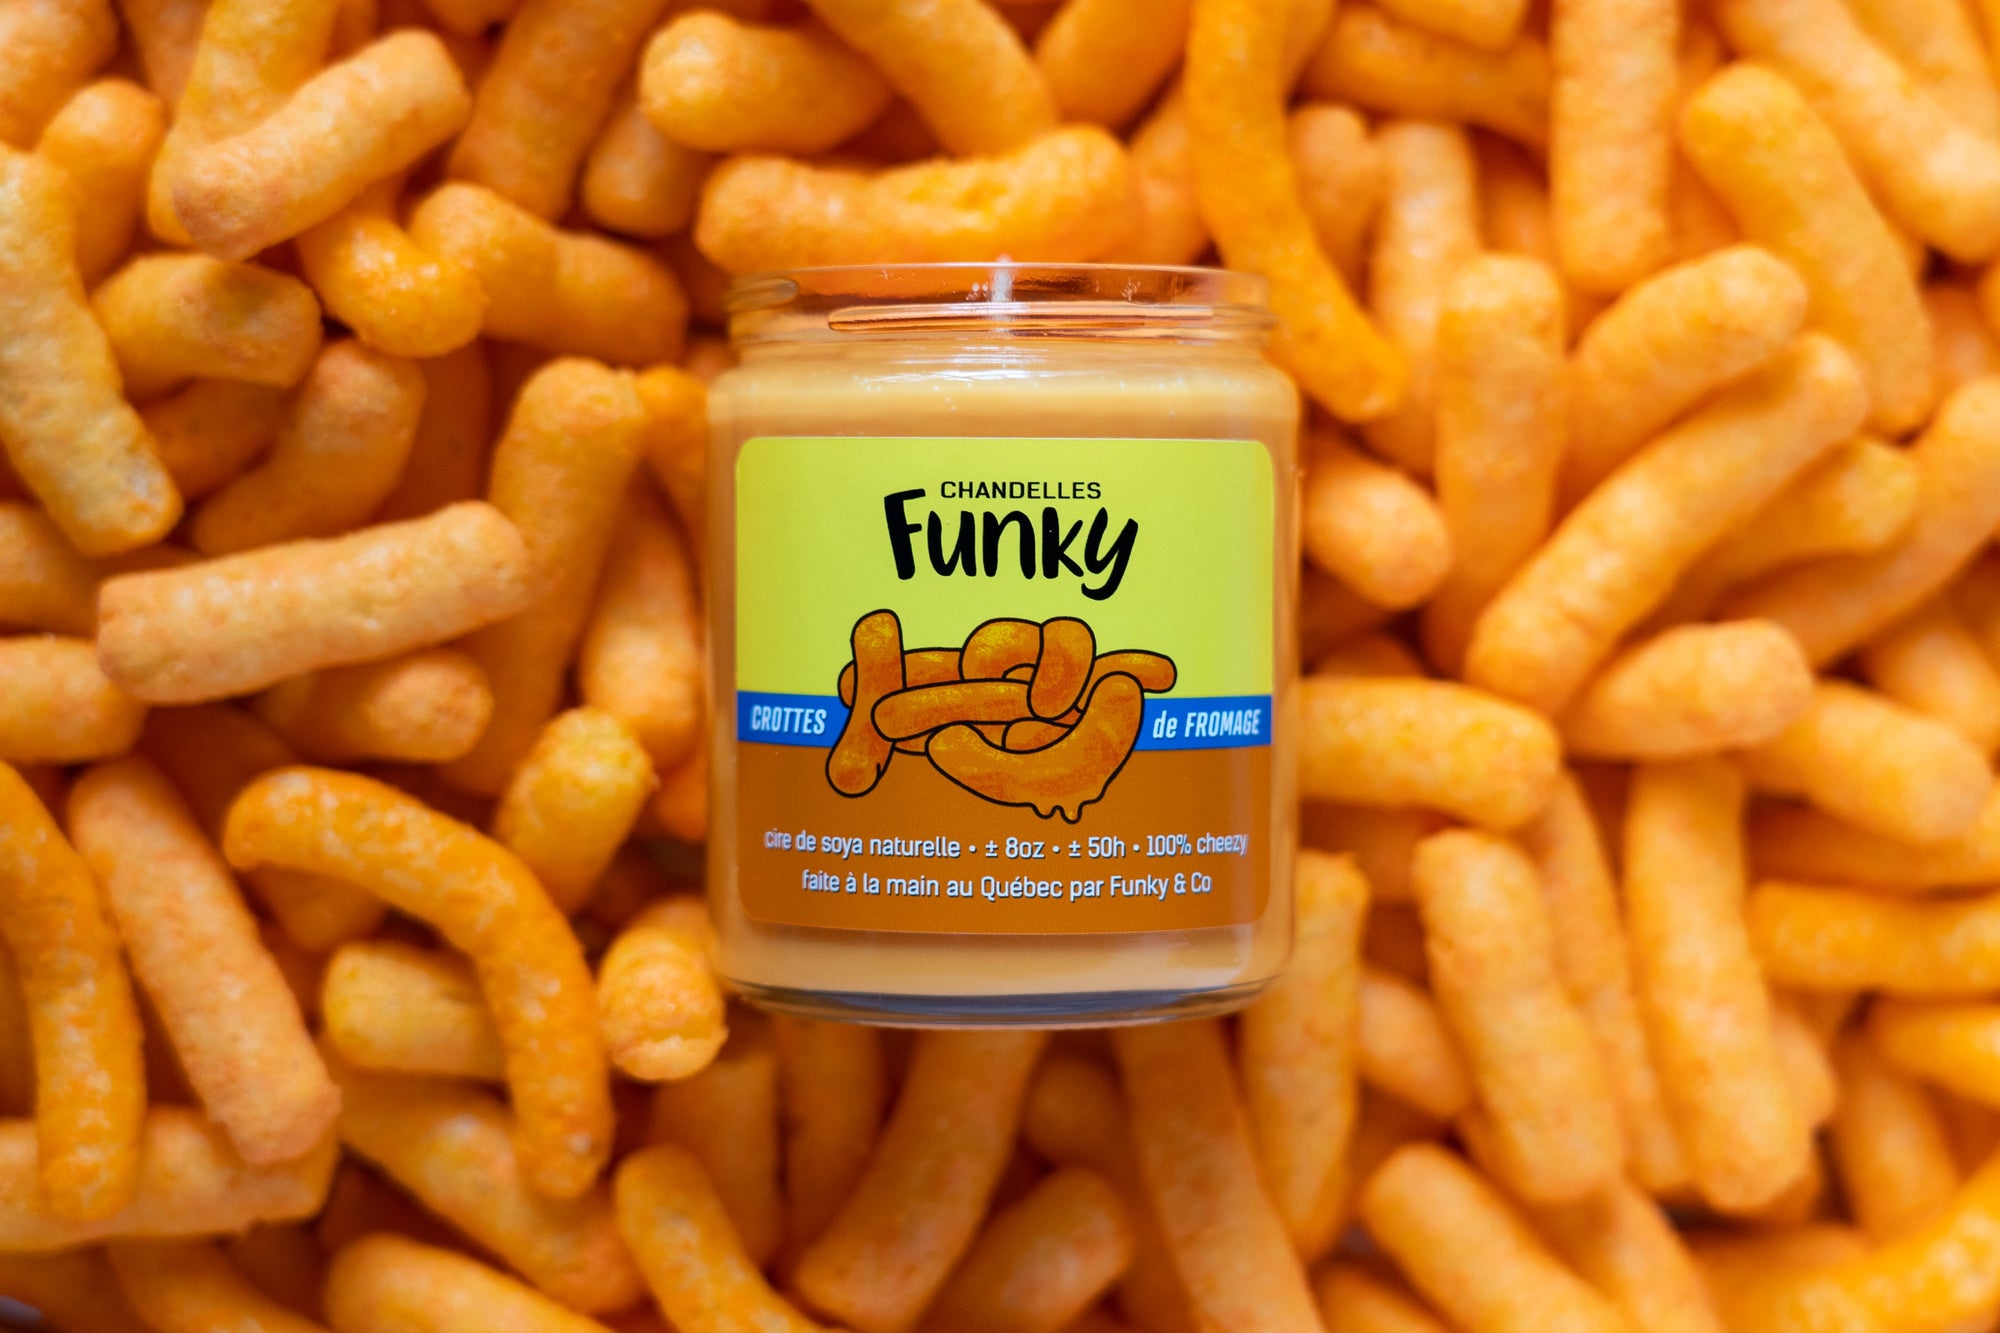 Chandelle Crottes de fromage - Funky - Funky & Co.